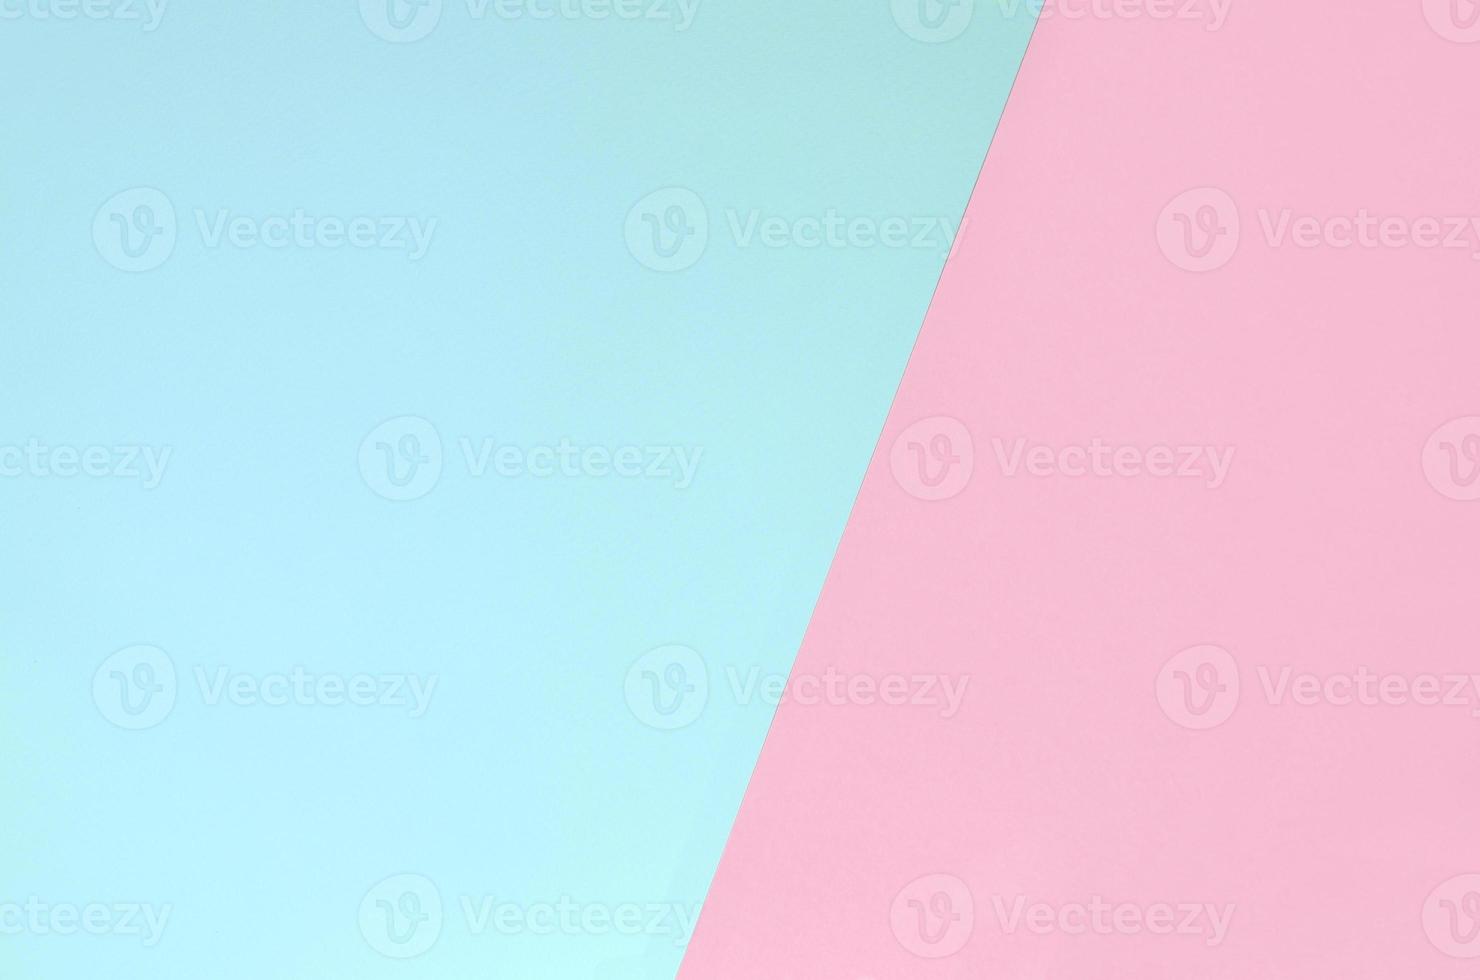 Texture background of fashion pastel colors. pink and blue geometric pattern papers. minimal abstract photo